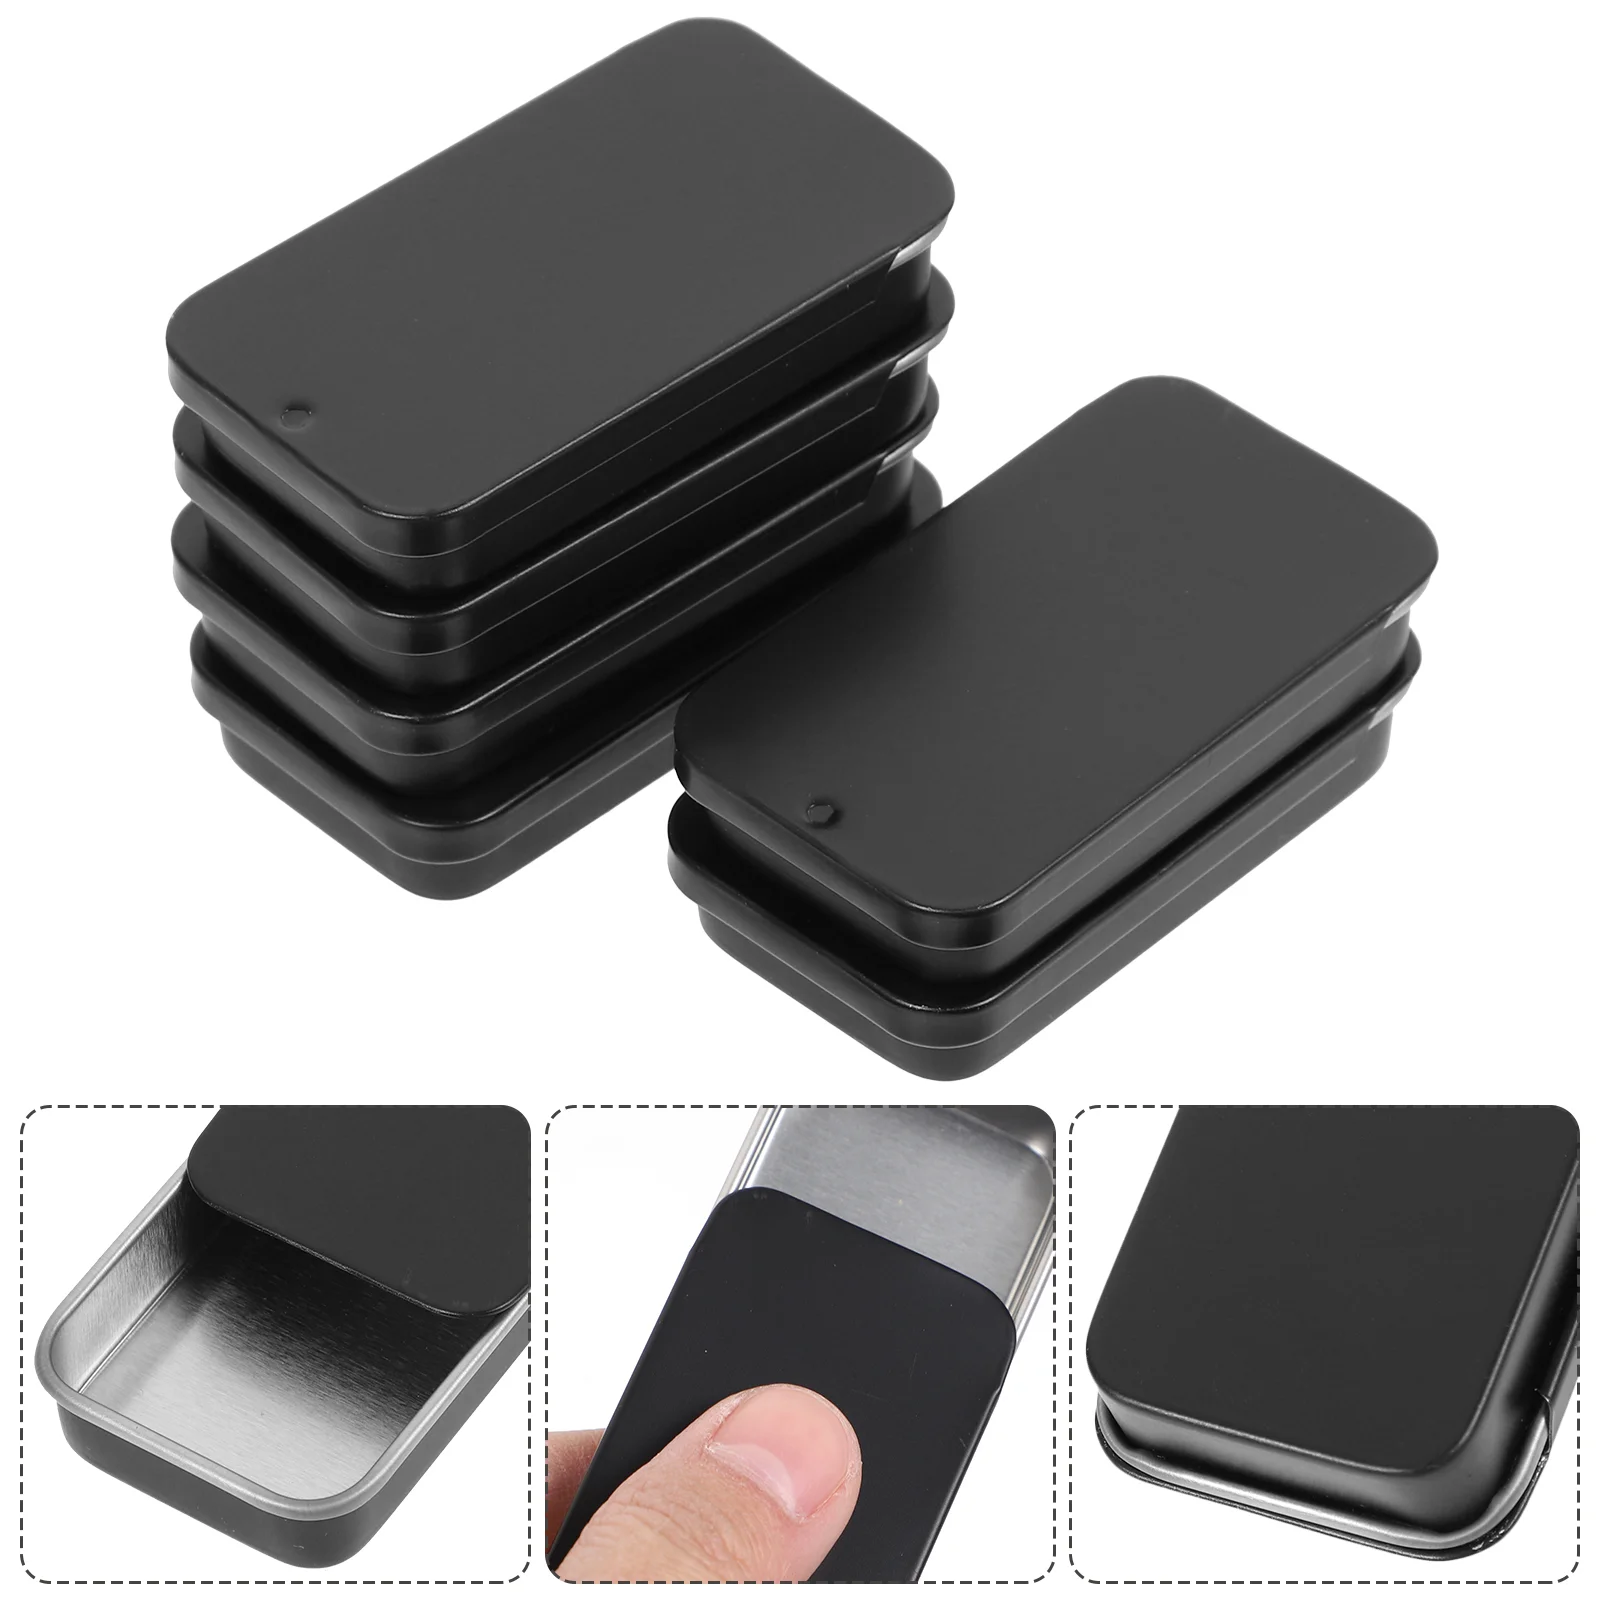 

12 Pcs Slide Tin Box Small Objects Holder Metal Tins Lids Candy Tinplate Mini Organizer Craft Storage Go Food Containers